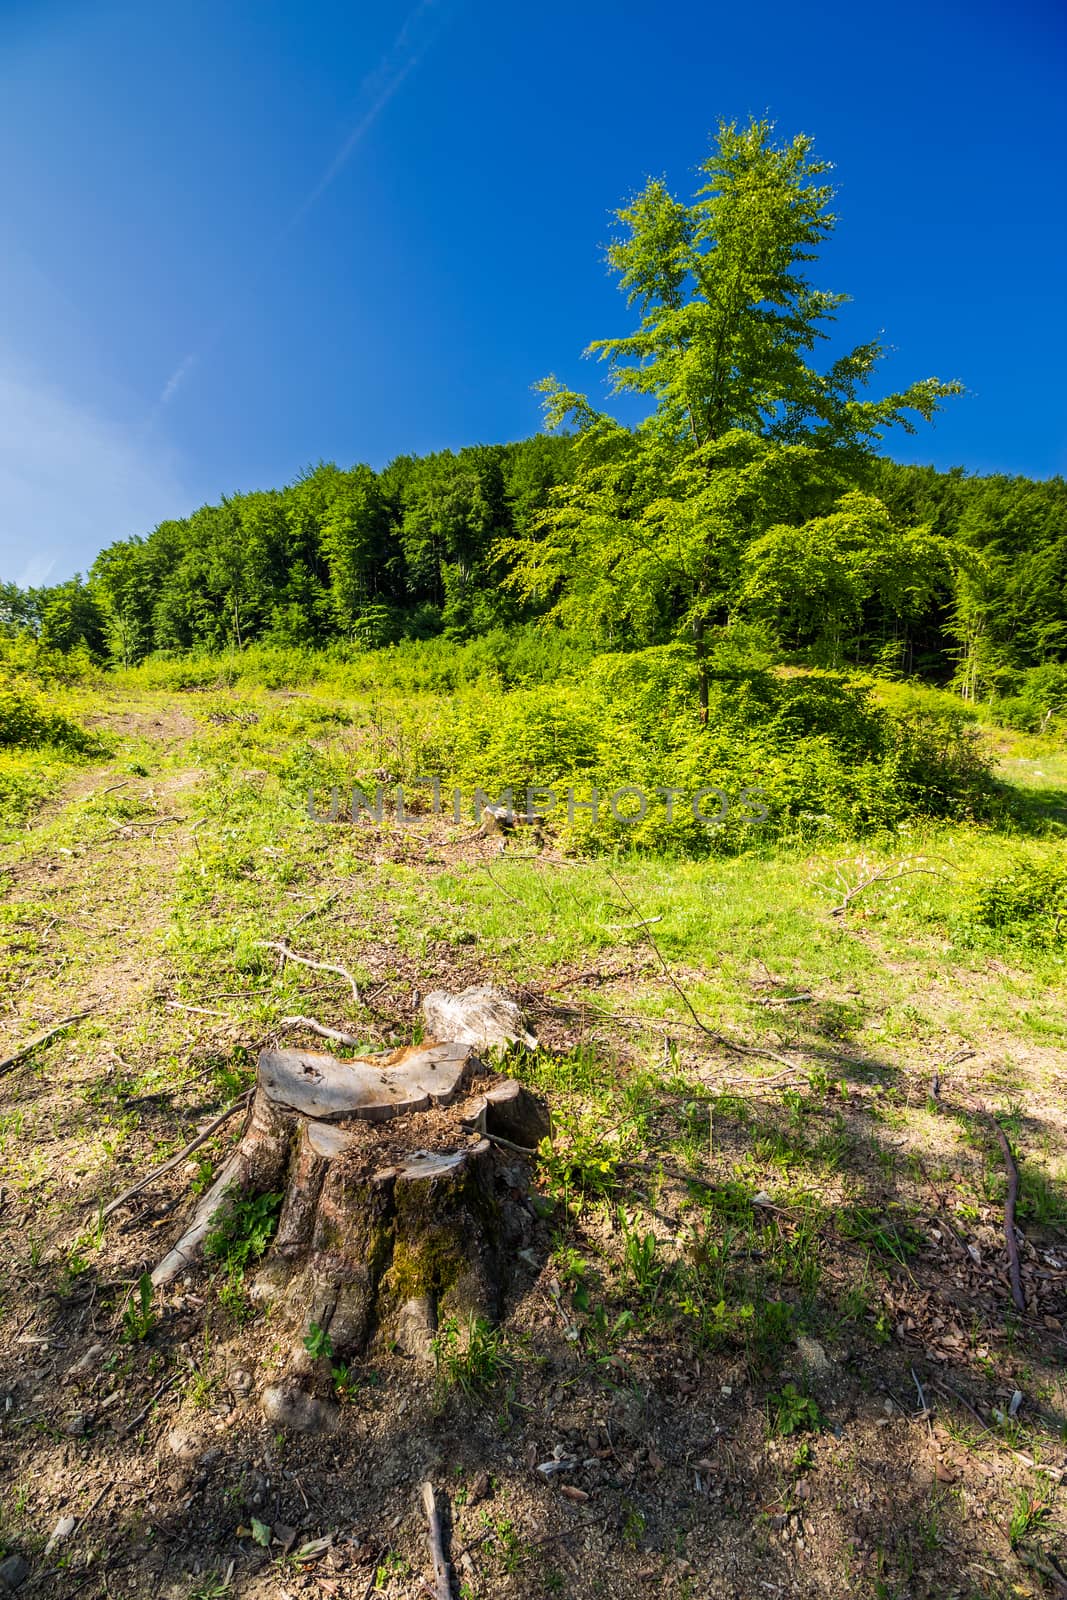 stump among the grass on logging place near forest in summer. shot with ultra wide angle lense